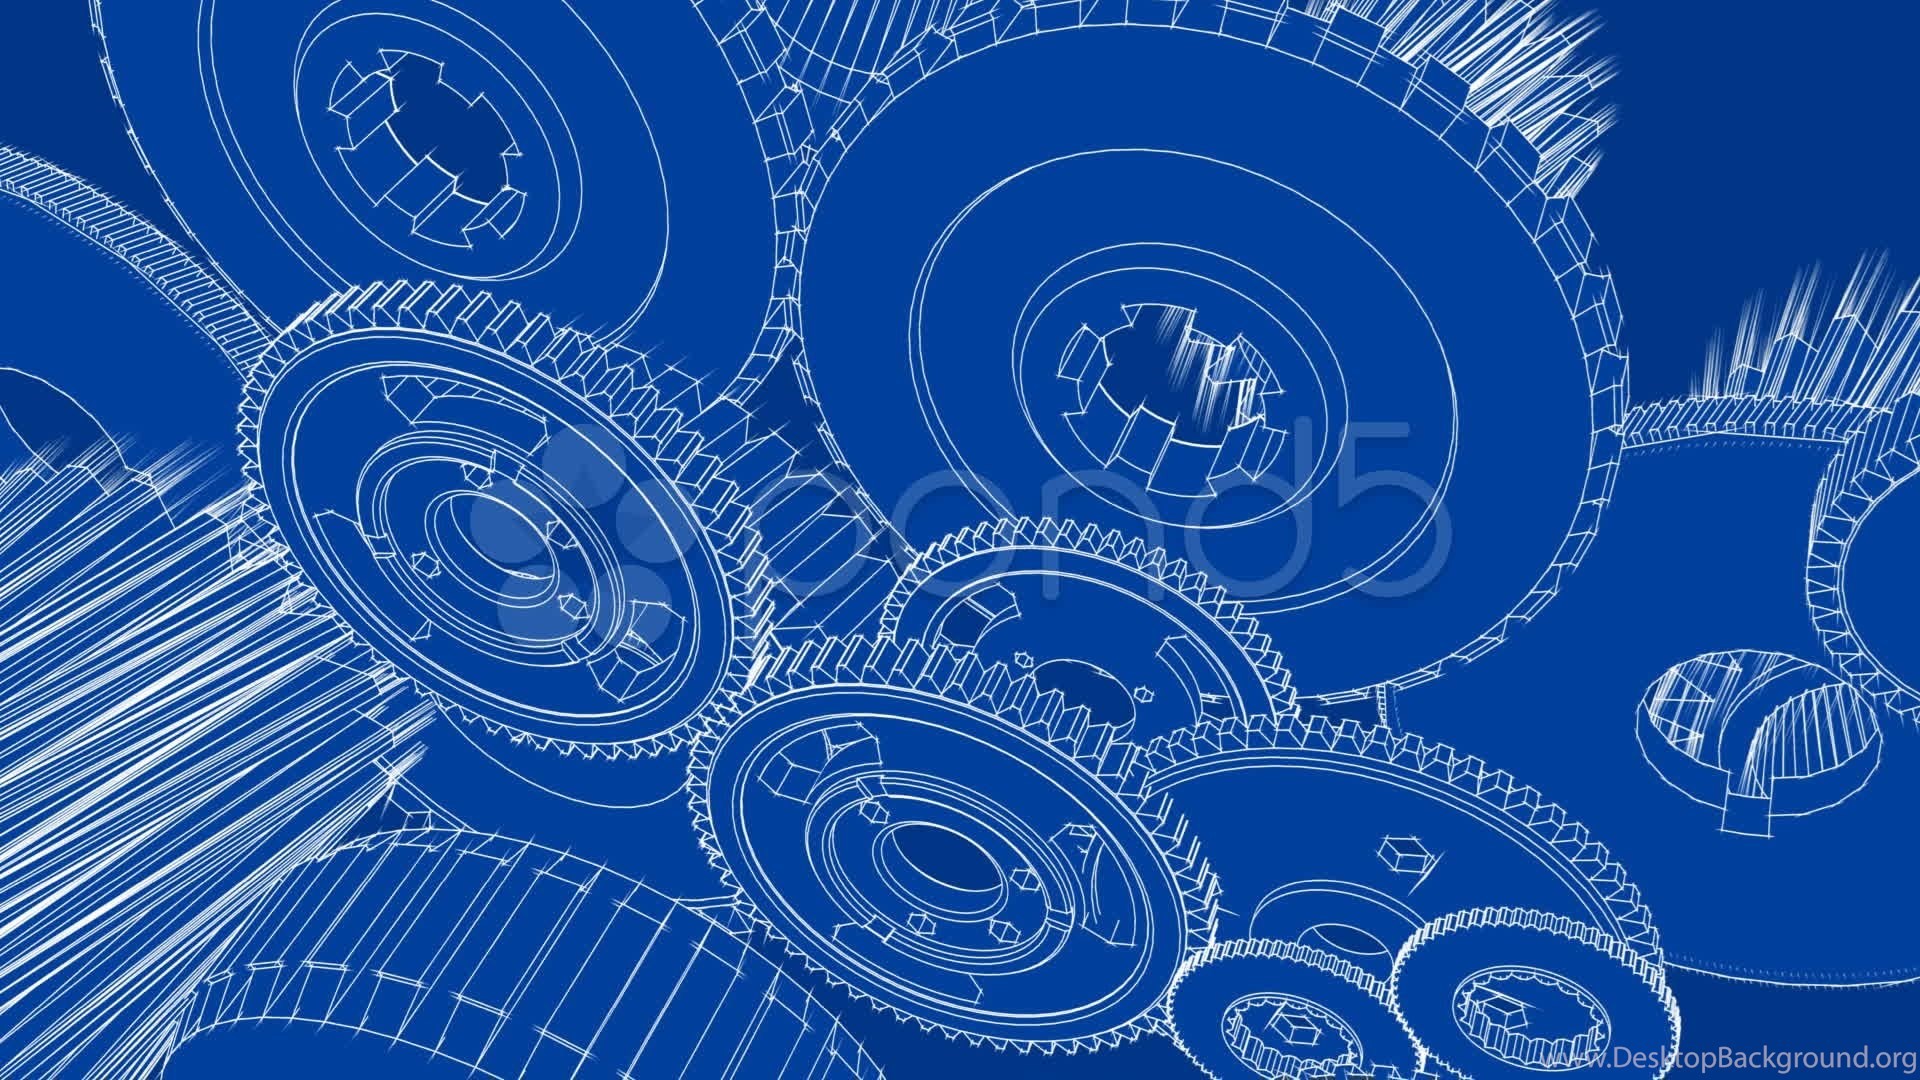 1920x1080 Gears Turning (Blueprint Sketch Animation) Stock Video 9888066 .